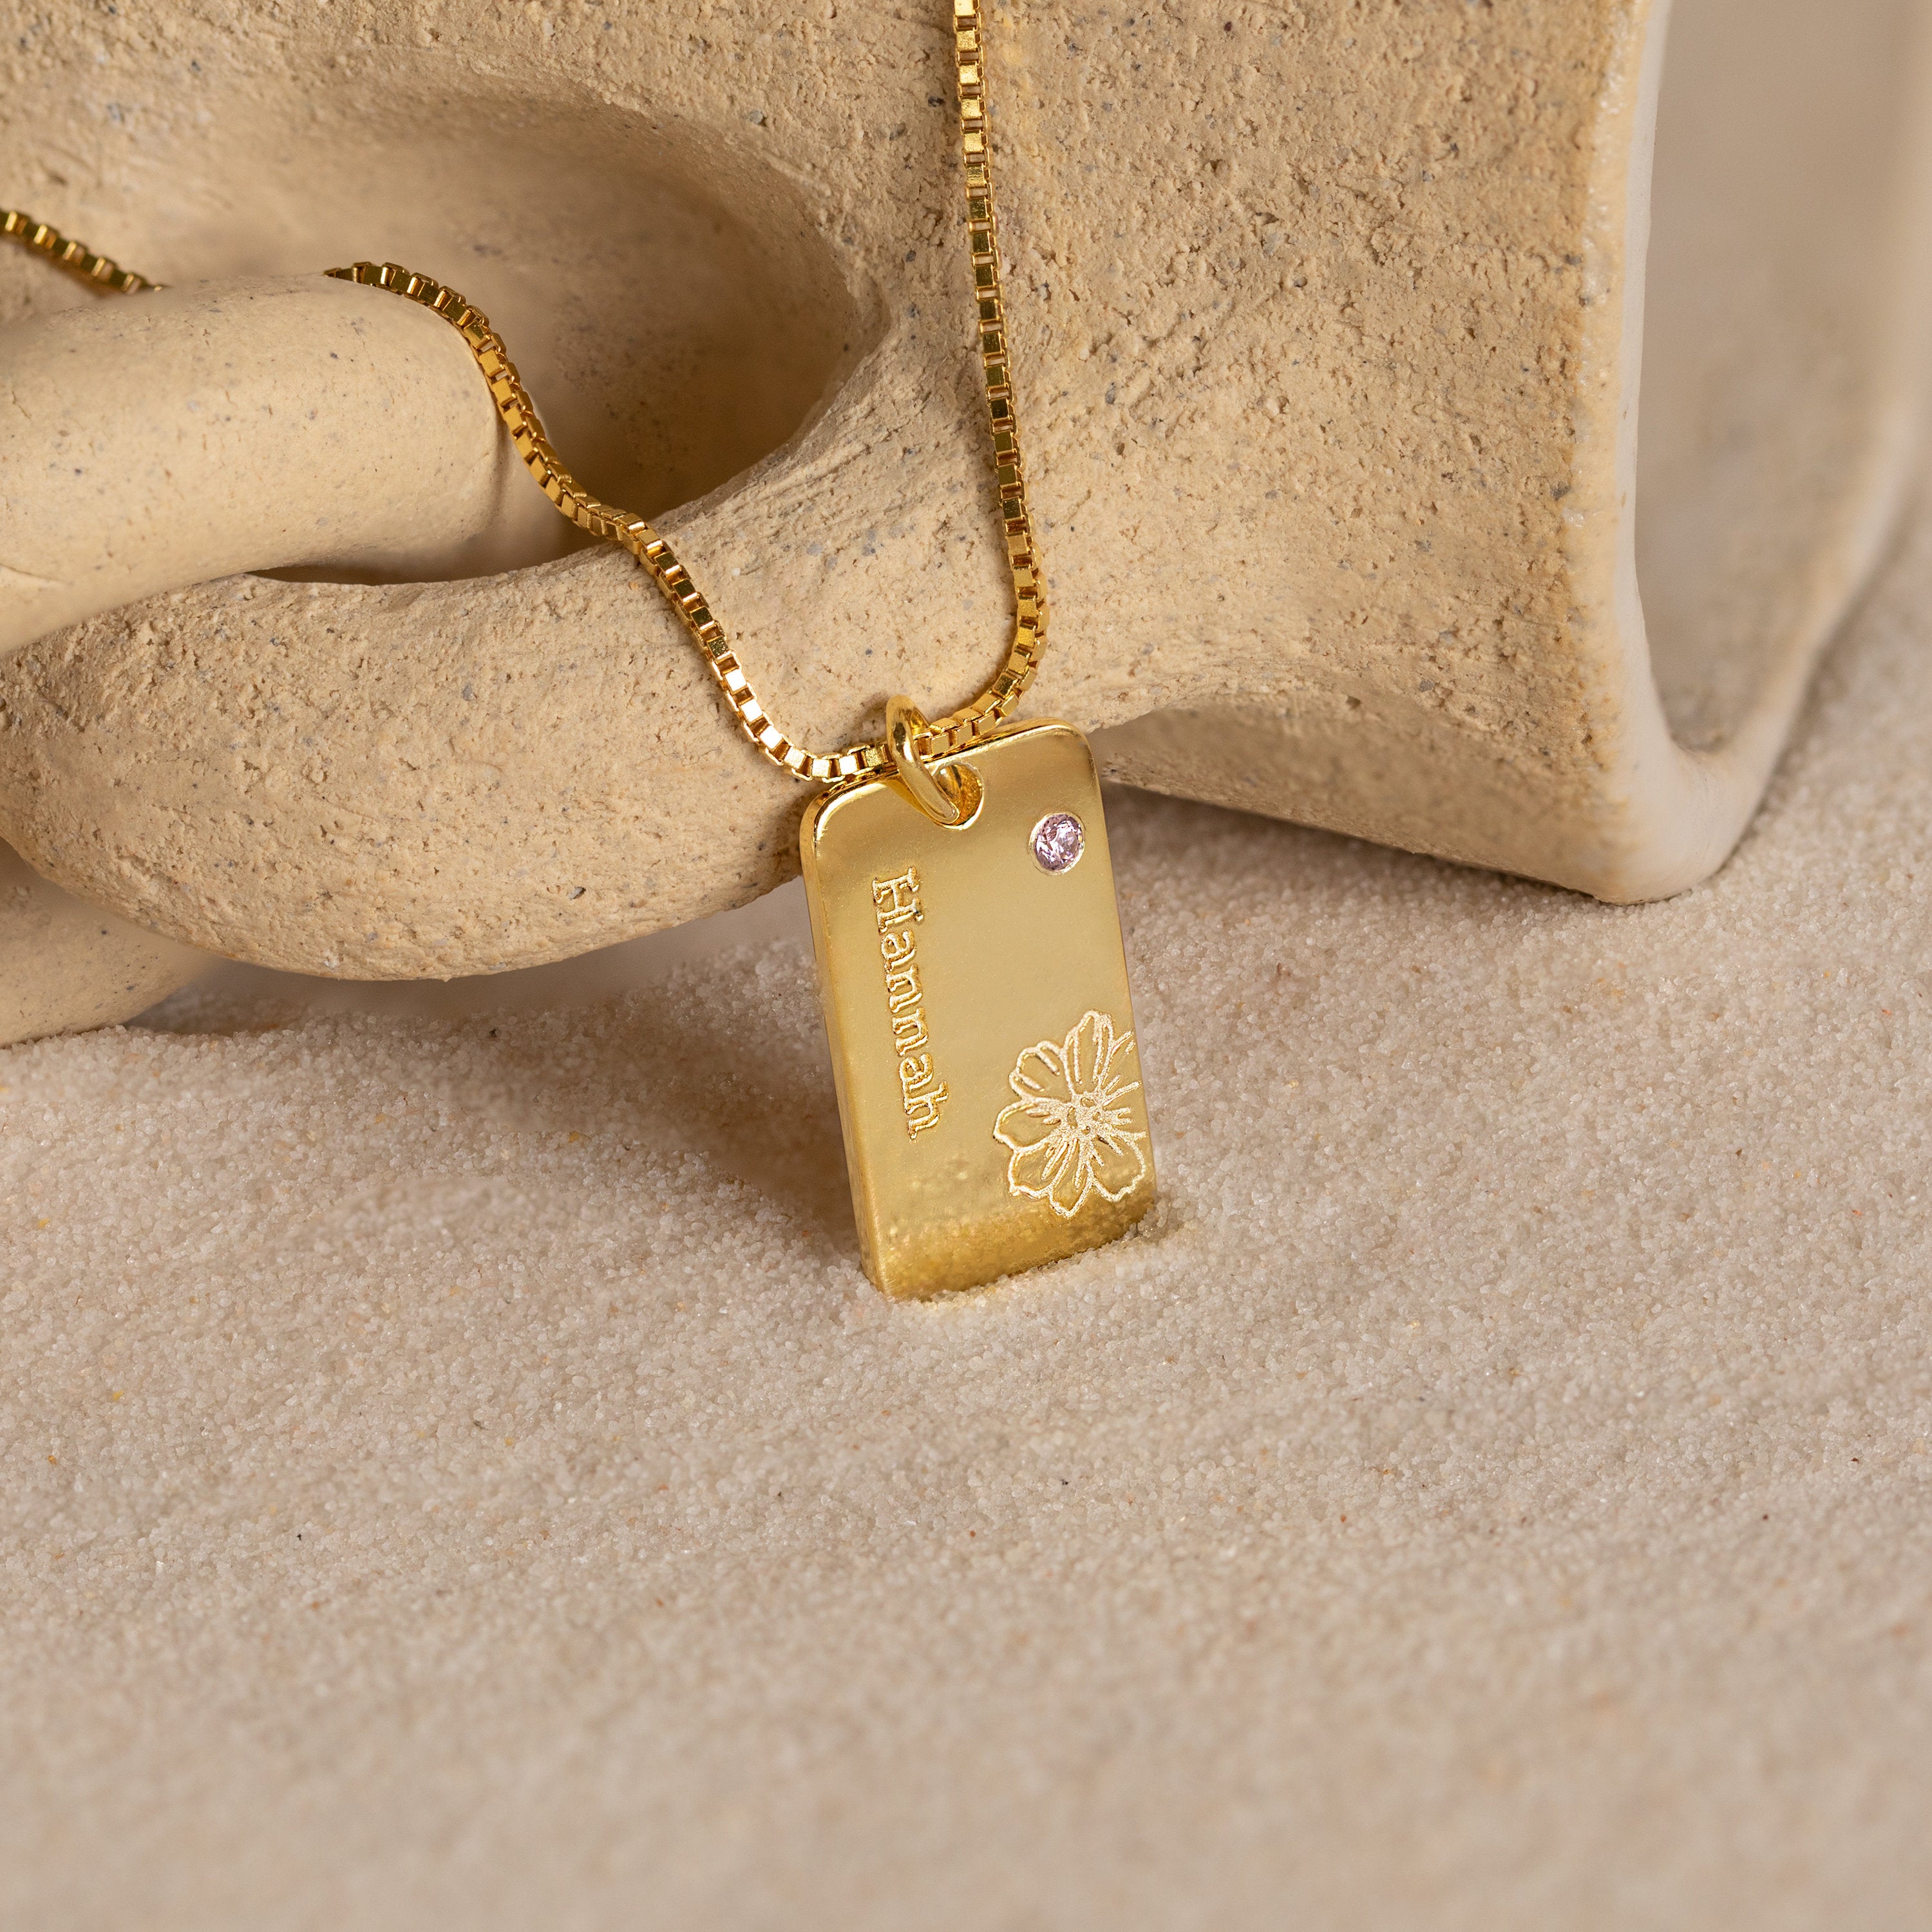 Engraved Couples Birthstone Necklace in 18k Gold Vermeil | My Name Necklace  Canada